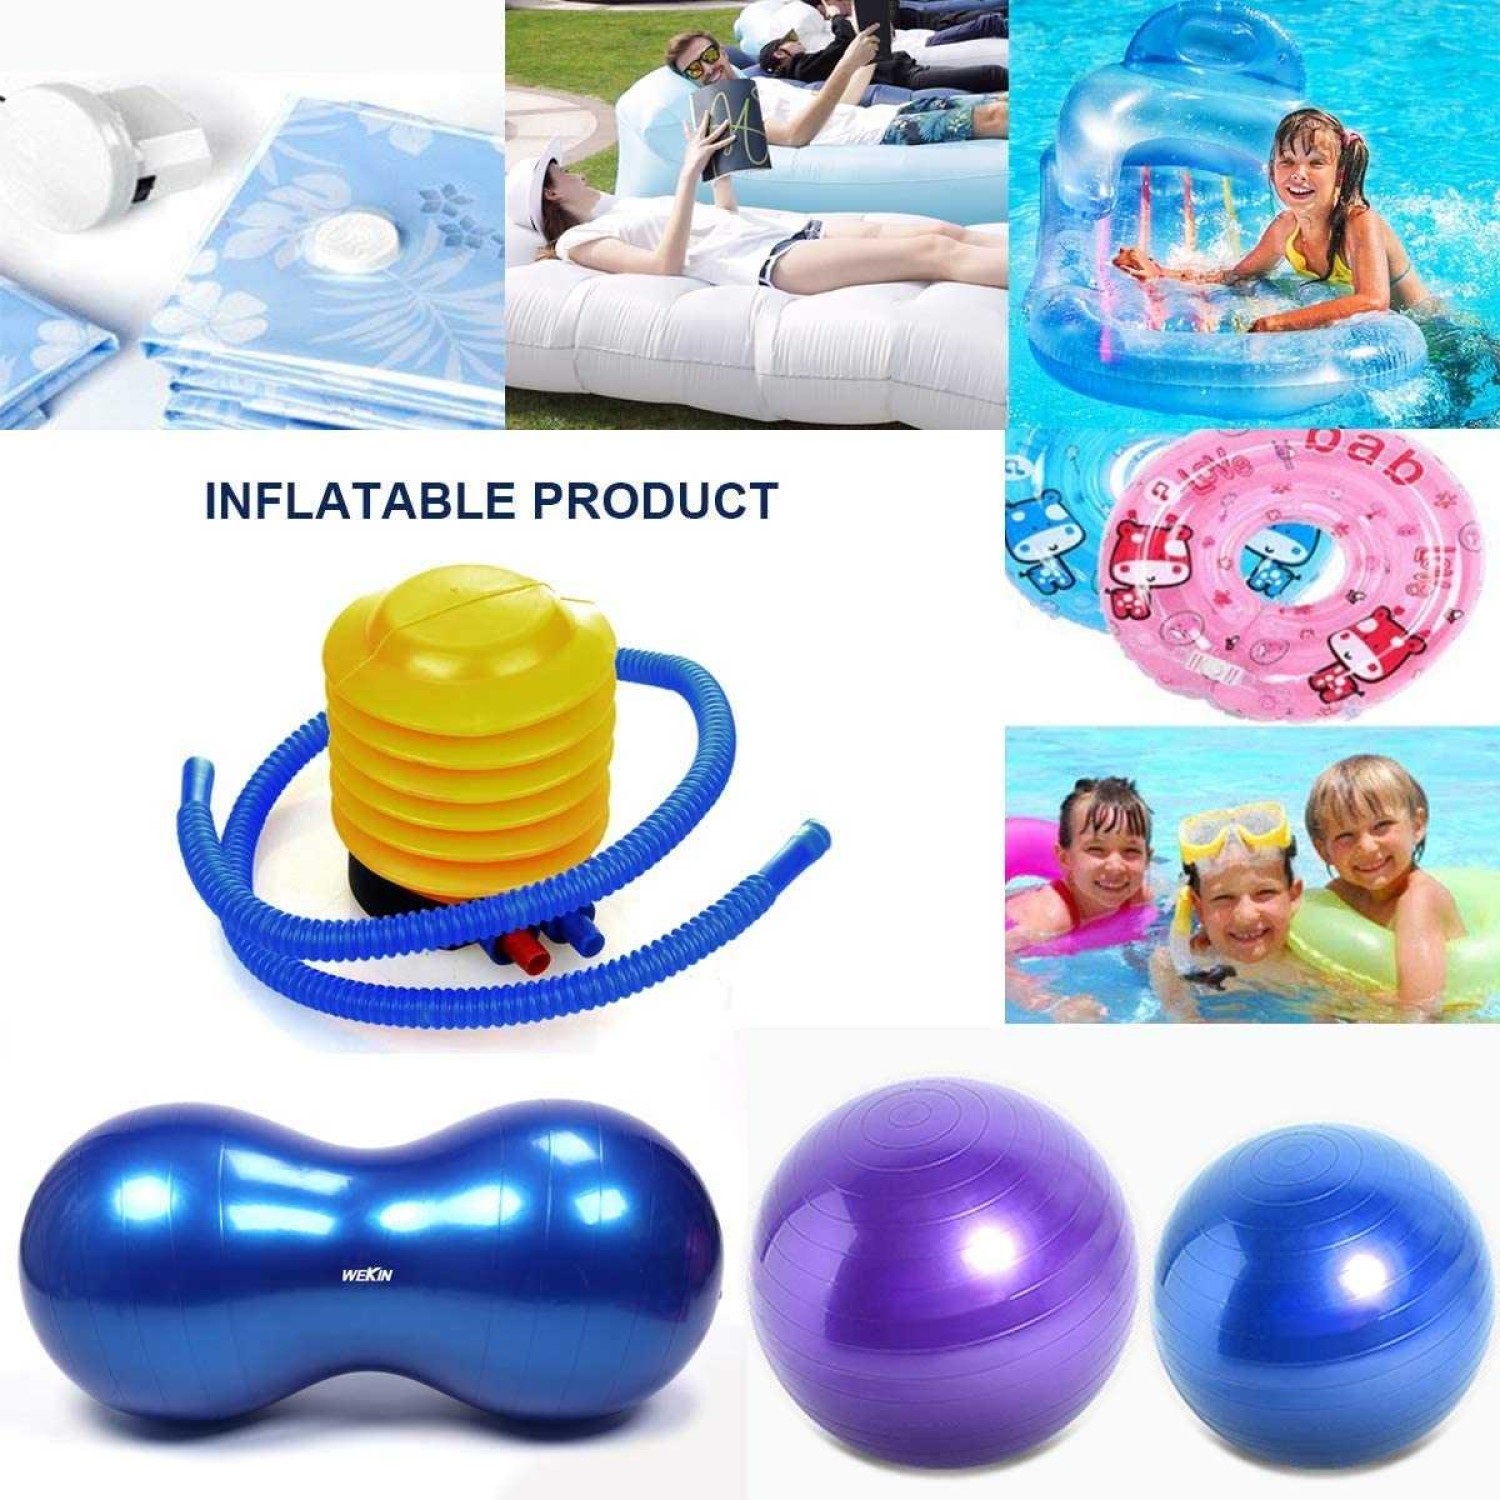 Details about   Air Step Inflatable Foot Pump Air Beds Mattress Pool Buoy Boat Yoga ball New 